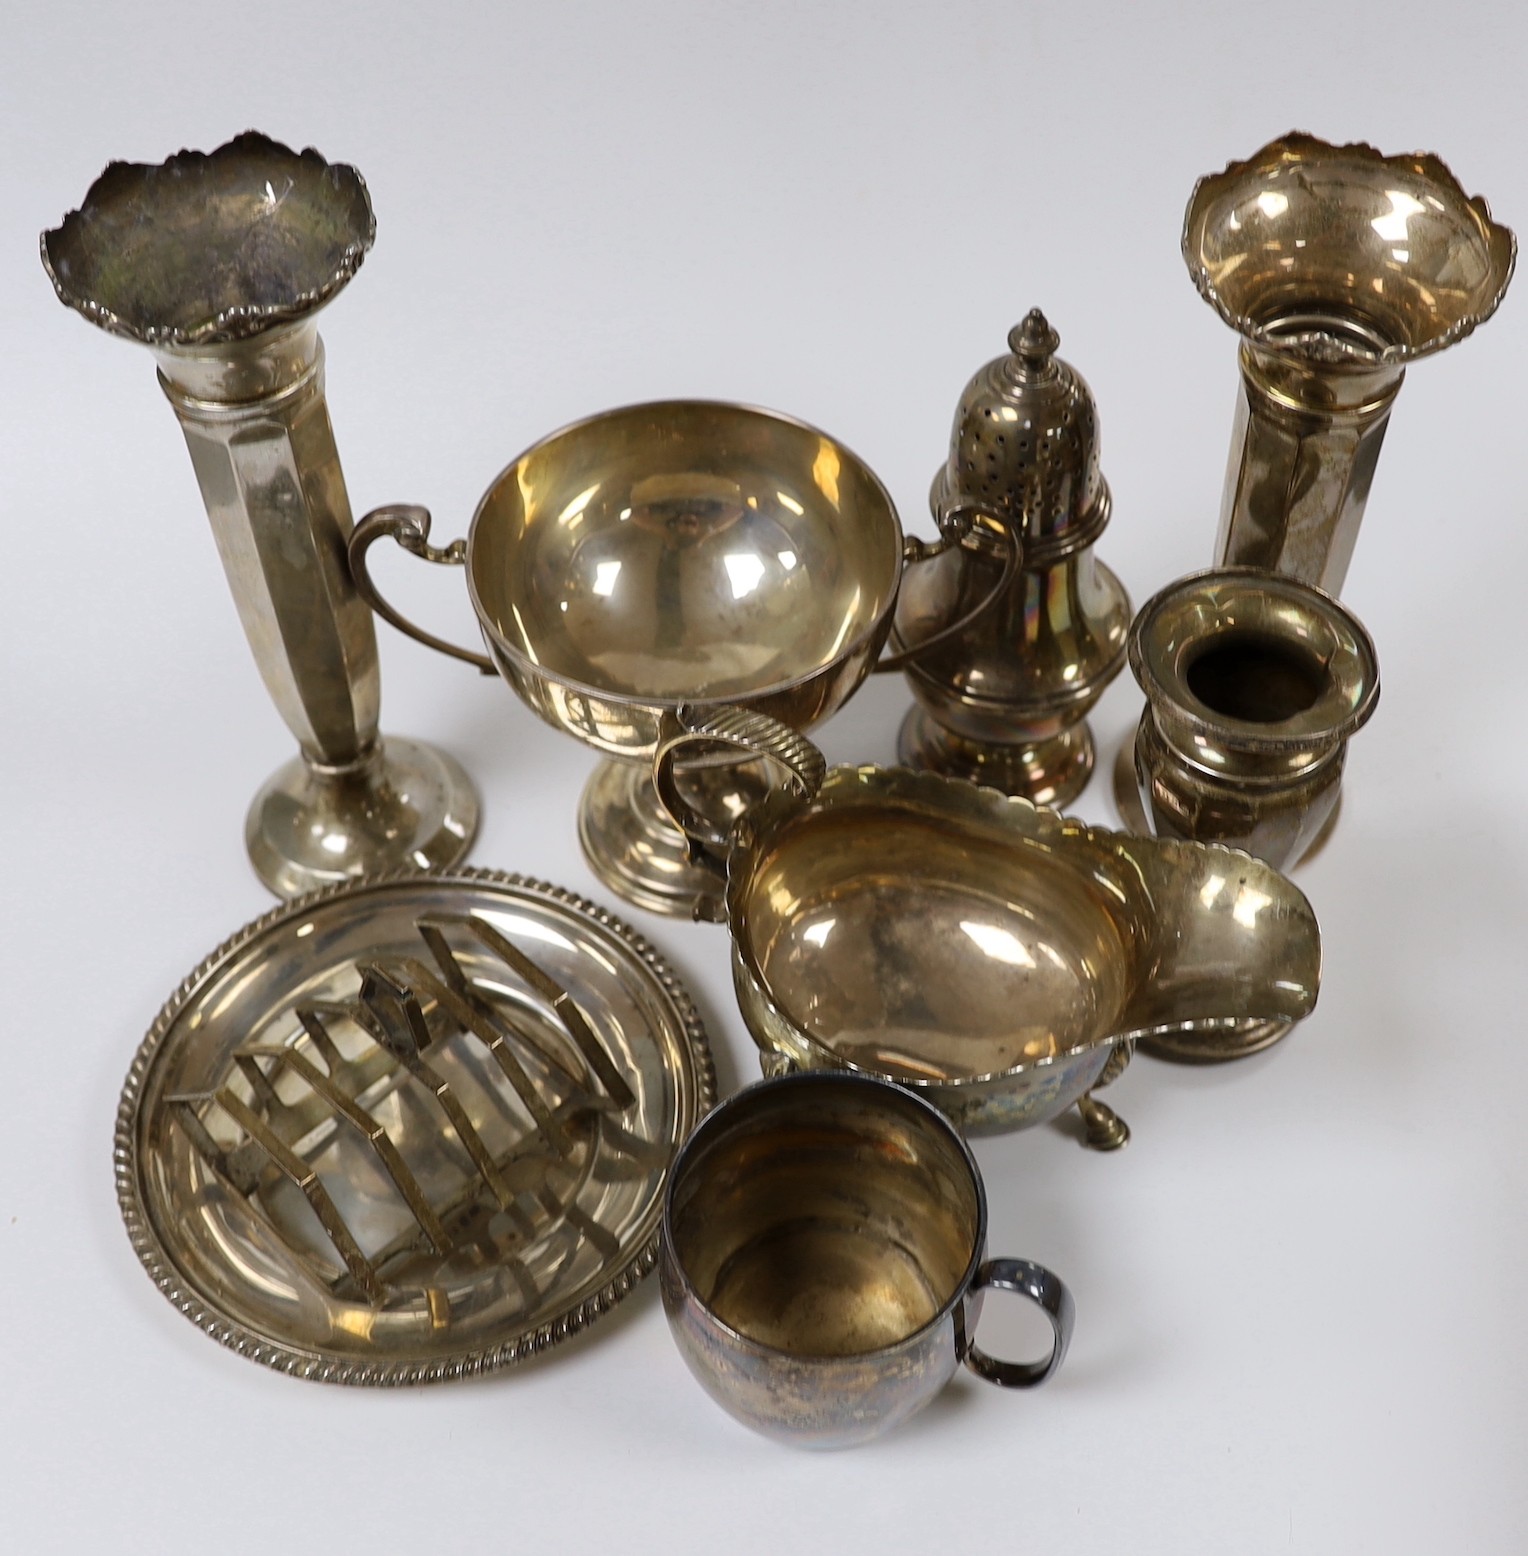 Assorted silver ware including a pair of George V spill vases, a small vase, a two handled trophy cup, sauceboat, mug, caster, stand and toastrack.